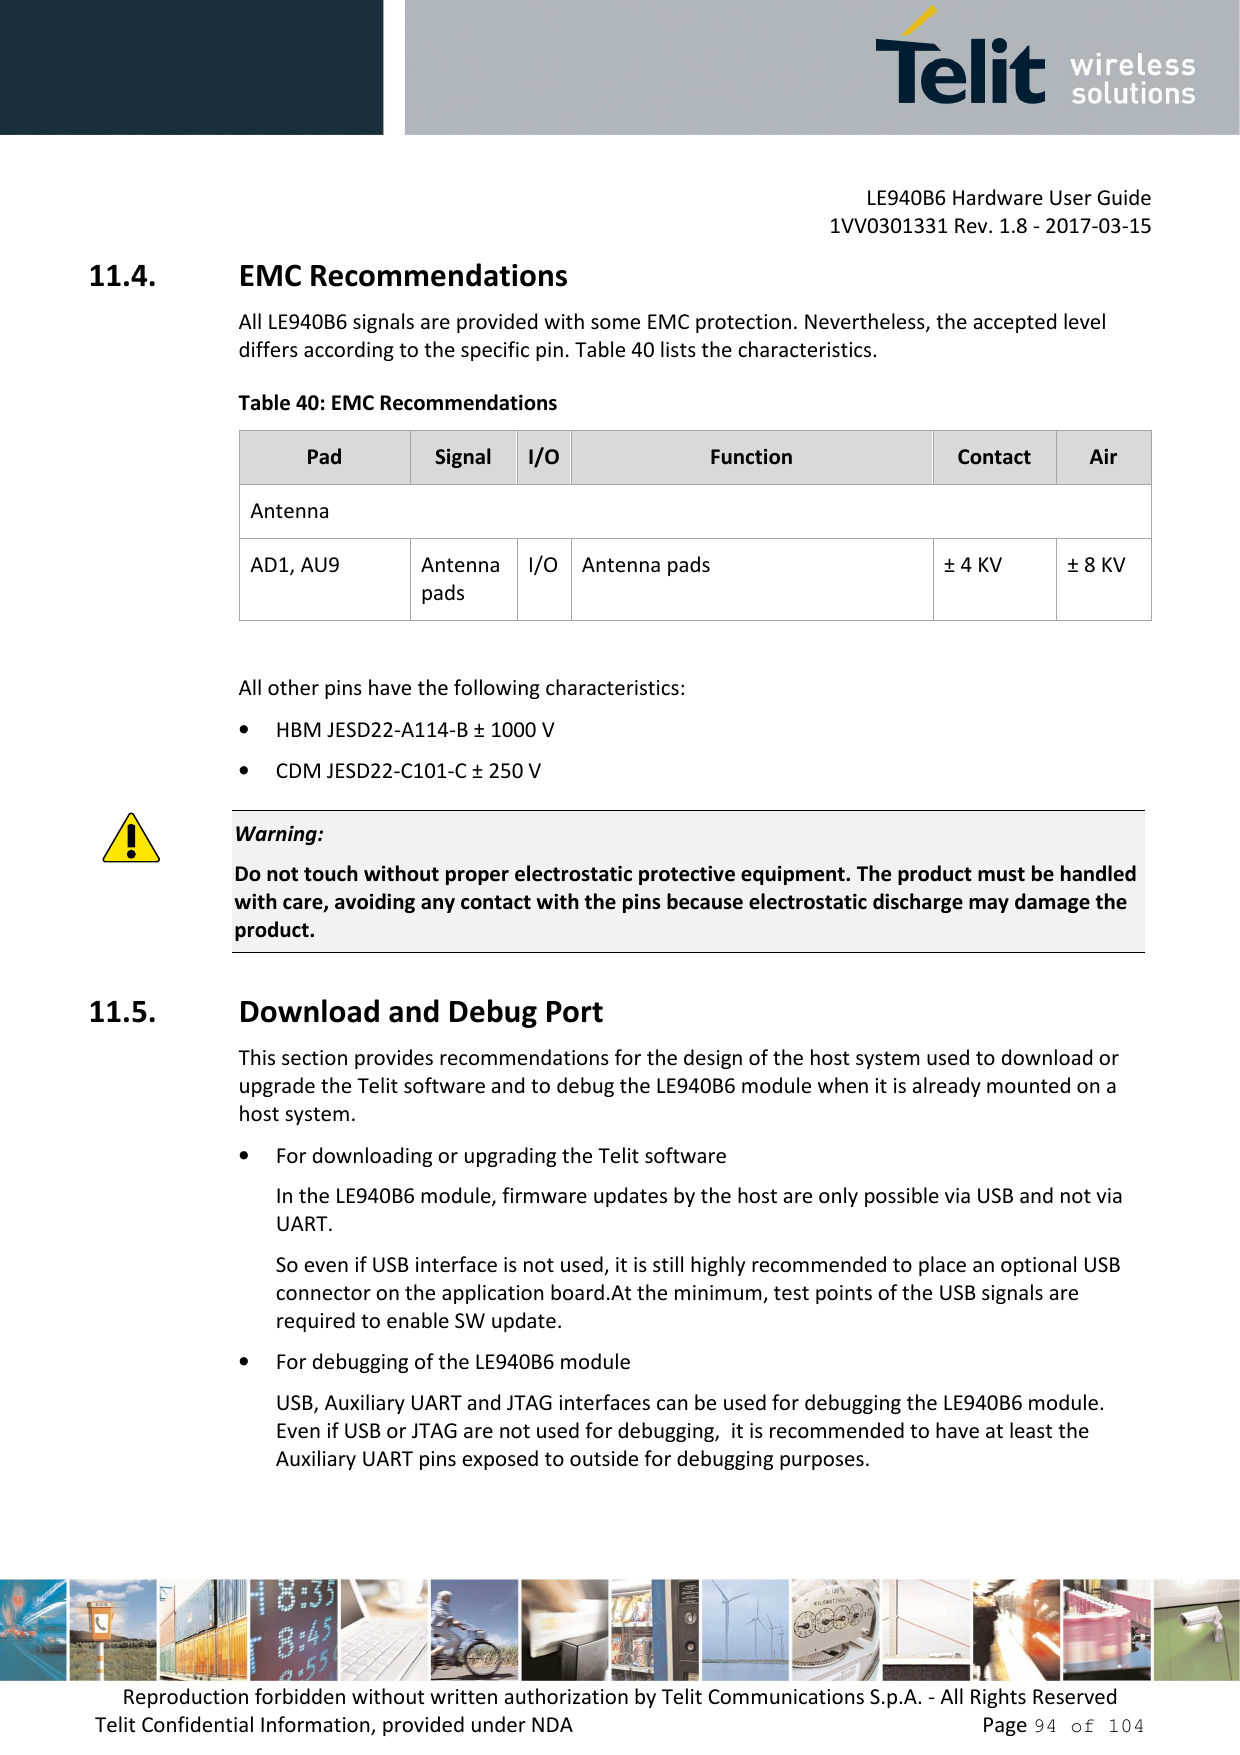         LE940B6 Hardware User Guide     1VV0301331 Rev. 1.8 - 2017-03-15 Reproduction forbidden without written authorization by Telit Communications S.p.A. - All Rights Reserved Telit Confidential Information, provided under NDA                 Page 94 of 104 11.4. EMC Recommendations All LE940B6 signals are provided with some EMC protection. Nevertheless, the accepted level differs according to the specific pin. Table 40 lists the characteristics. Table 40: EMC Recommendations Pad  Signal  I/O Function  Contact  Air Antenna AD1, AU9  Antenna pads I/O Antenna pads  ± 4 KV  ± 8 KV  All other pins have the following characteristics: • HBM JESD22-A114-B ± 1000 V • CDM JESD22-C101-C ± 250 V  Warning: Do not touch without proper electrostatic protective equipment. The product must be handled with care, avoiding any contact with the pins because electrostatic discharge may damage the product. 11.5. Download and Debug Port This section provides recommendations for the design of the host system used to download or upgrade the Telit software and to debug the LE940B6 module when it is already mounted on a host system. • For downloading or upgrading the Telit software In the LE940B6 module, firmware updates by the host are only possible via USB and not via UART. So even if USB interface is not used, it is still highly recommended to place an optional USB connector on the application board.At the minimum, test points of the USB signals are required to enable SW update.  • For debugging of the LE940B6 module USB, Auxiliary UART and JTAG interfaces can be used for debugging the LE940B6 module. Even if USB or JTAG are not used for debugging,  it is recommended to have at least the Auxiliary UART pins exposed to outside for debugging purposes. 